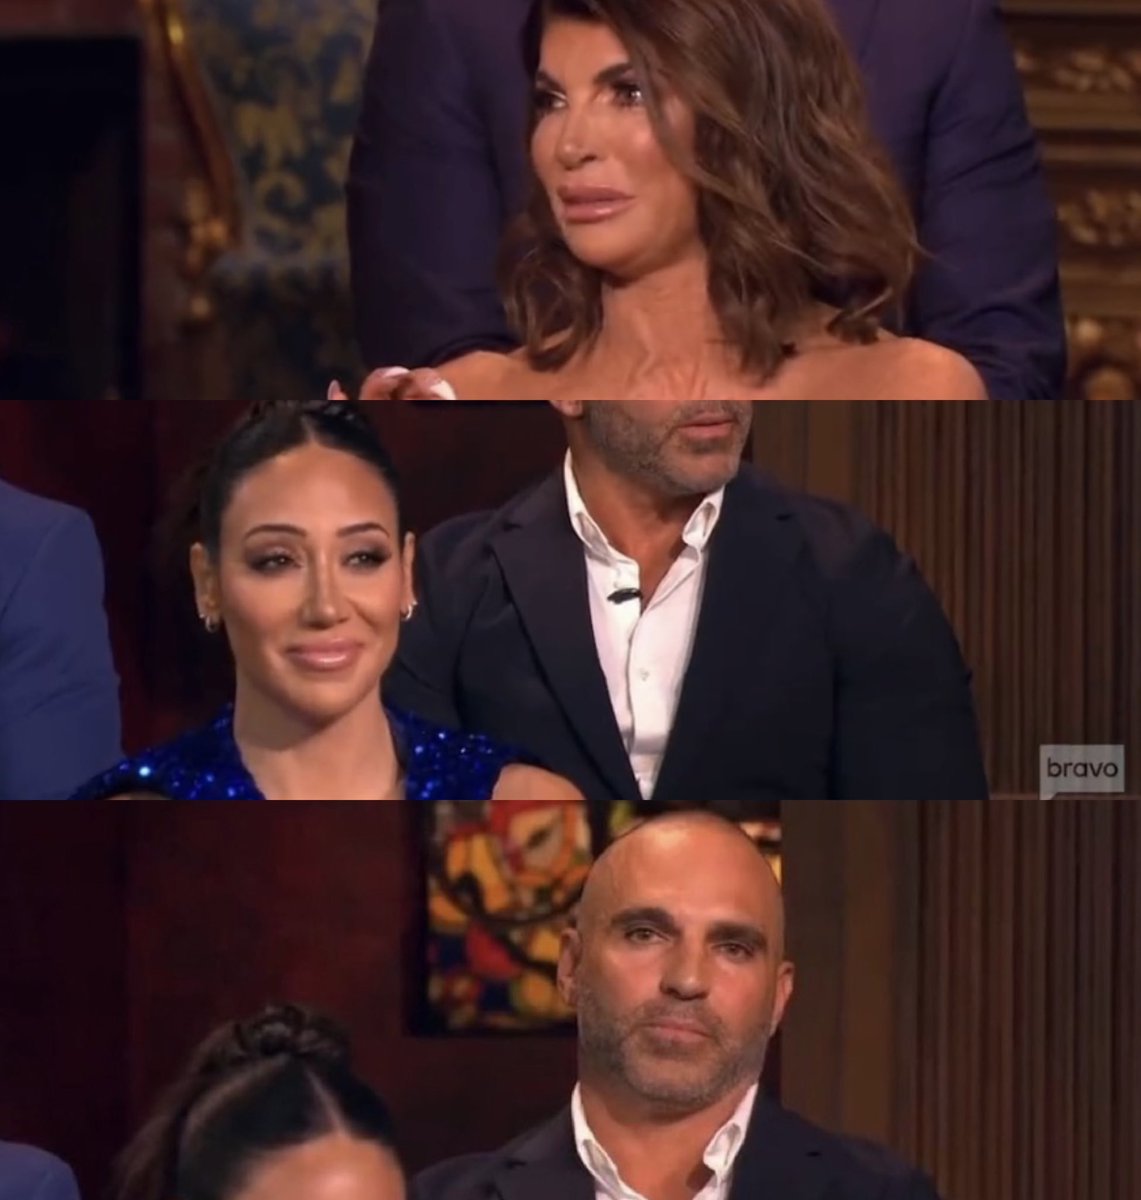 The pain in Teresa and Joe’s eyes 

Melissa feeling smug because she achieved what she always wanted. Joe had no relationship with his parents when they died, he has no relationship with his sisters and now his nieces. 

 #RHONJ